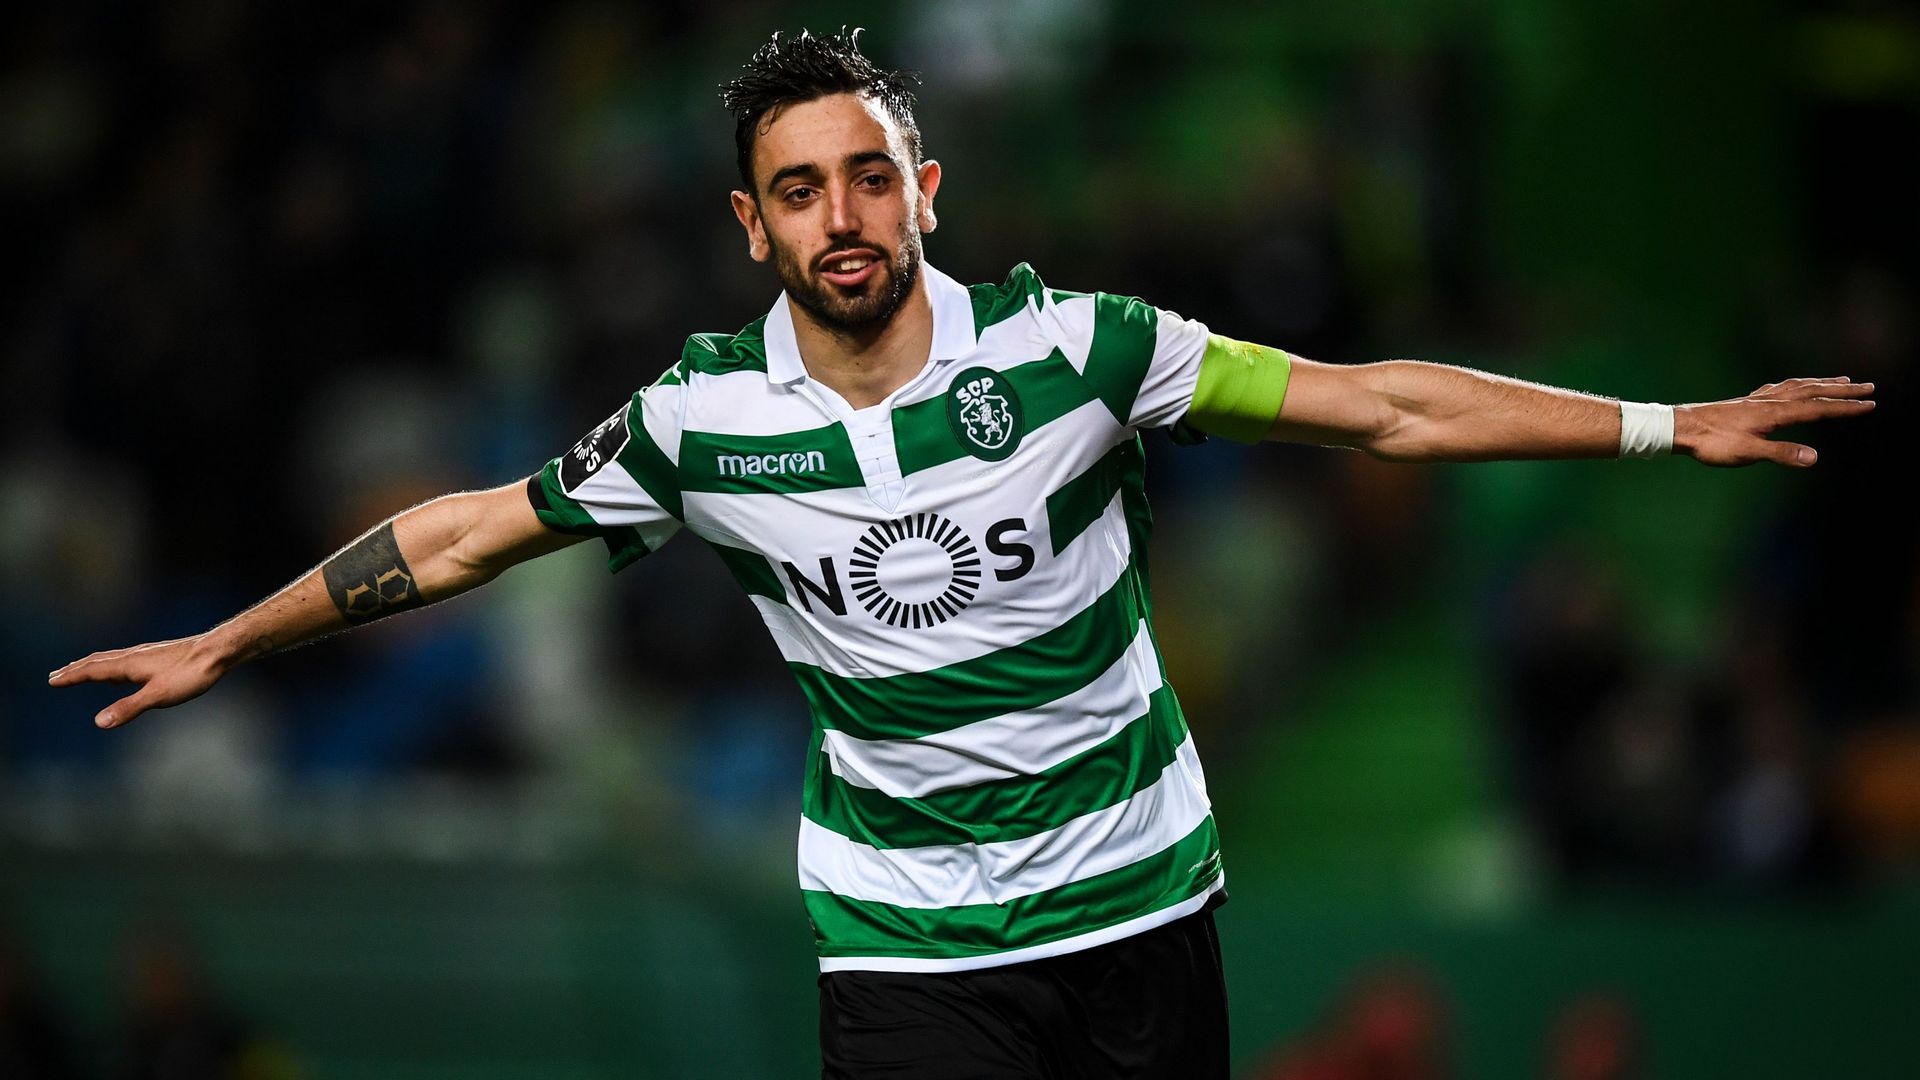 Man Utd target Bruno Fernandes signs new Sporting contract